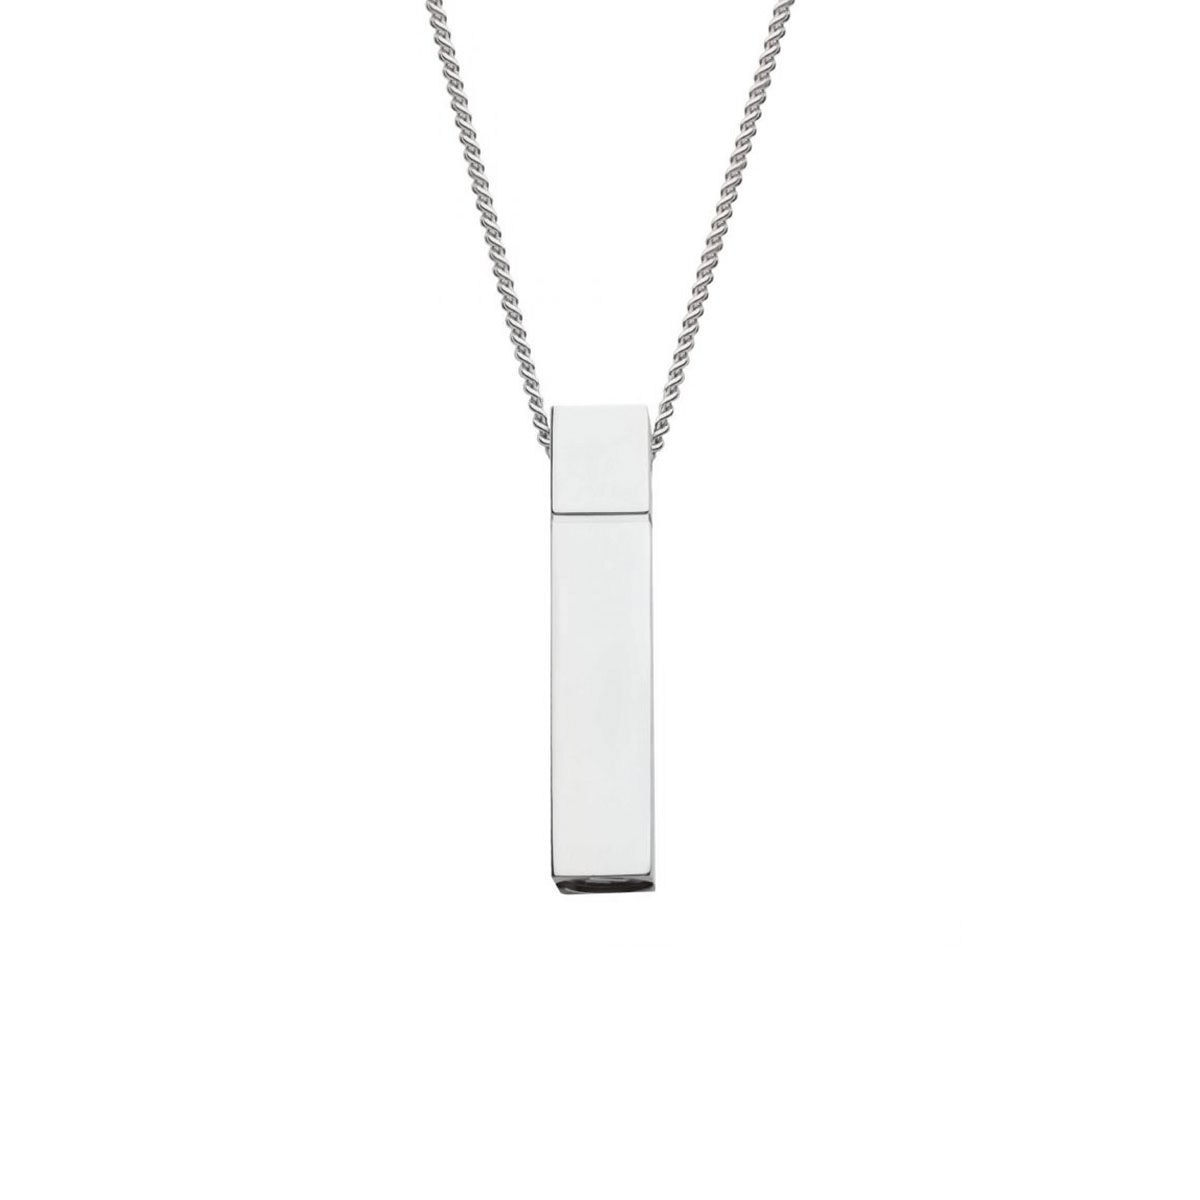 Sterling Silver Keepsake Bar Pendant with Chain